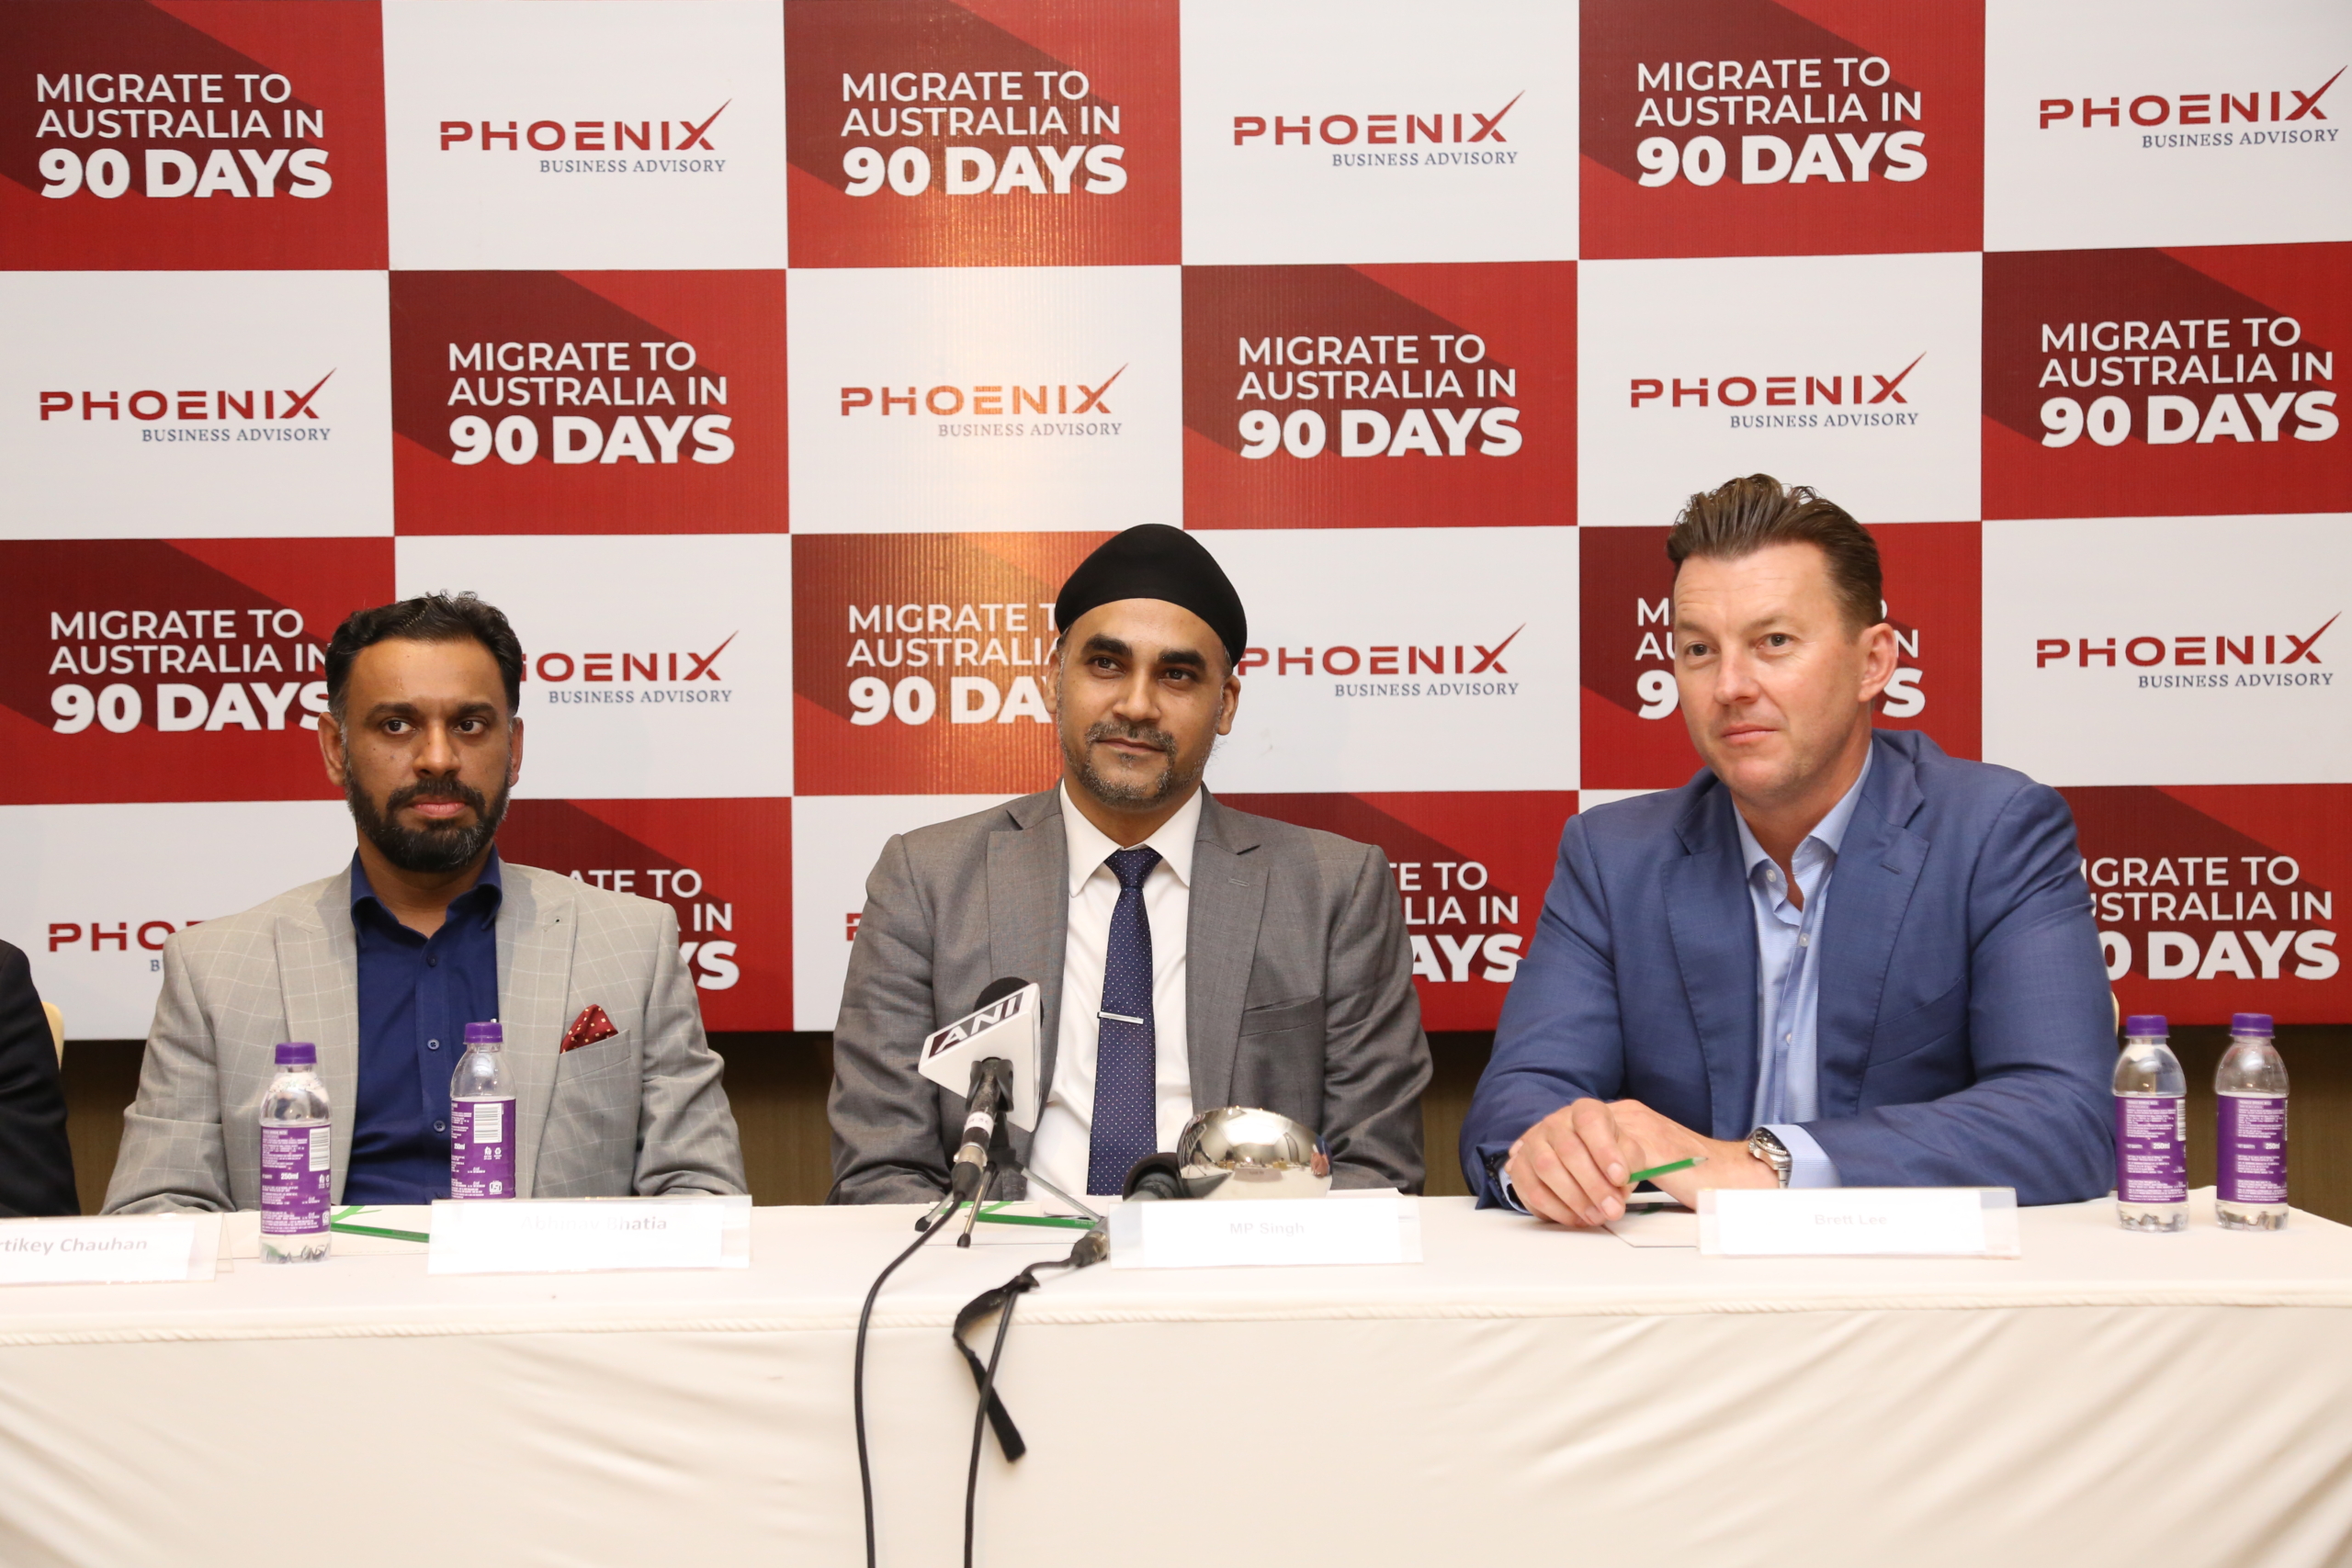 With Over 200 Applications Processed Successfully, Phoenix Business Advisory Aims to Help 2000 Indian HNIs to Expand Their Business in Australia by 2025